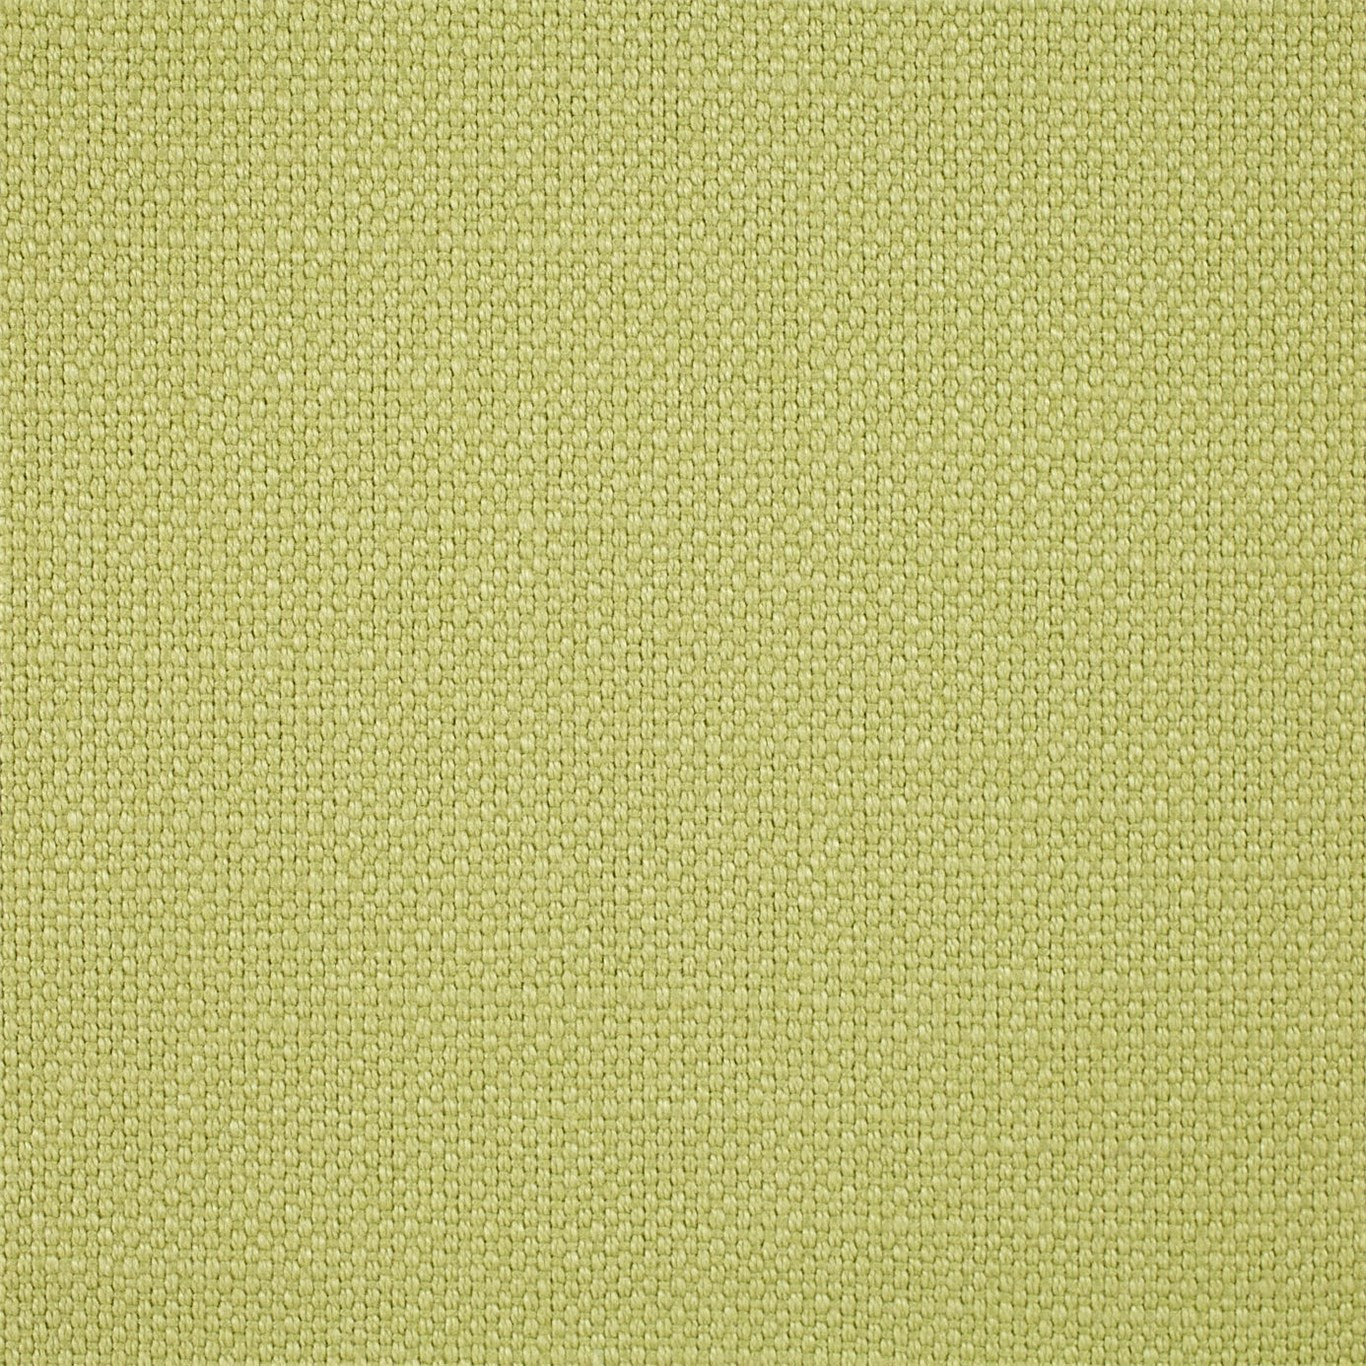 Arley Fabric by Sanderson - DALY245826 - Linden